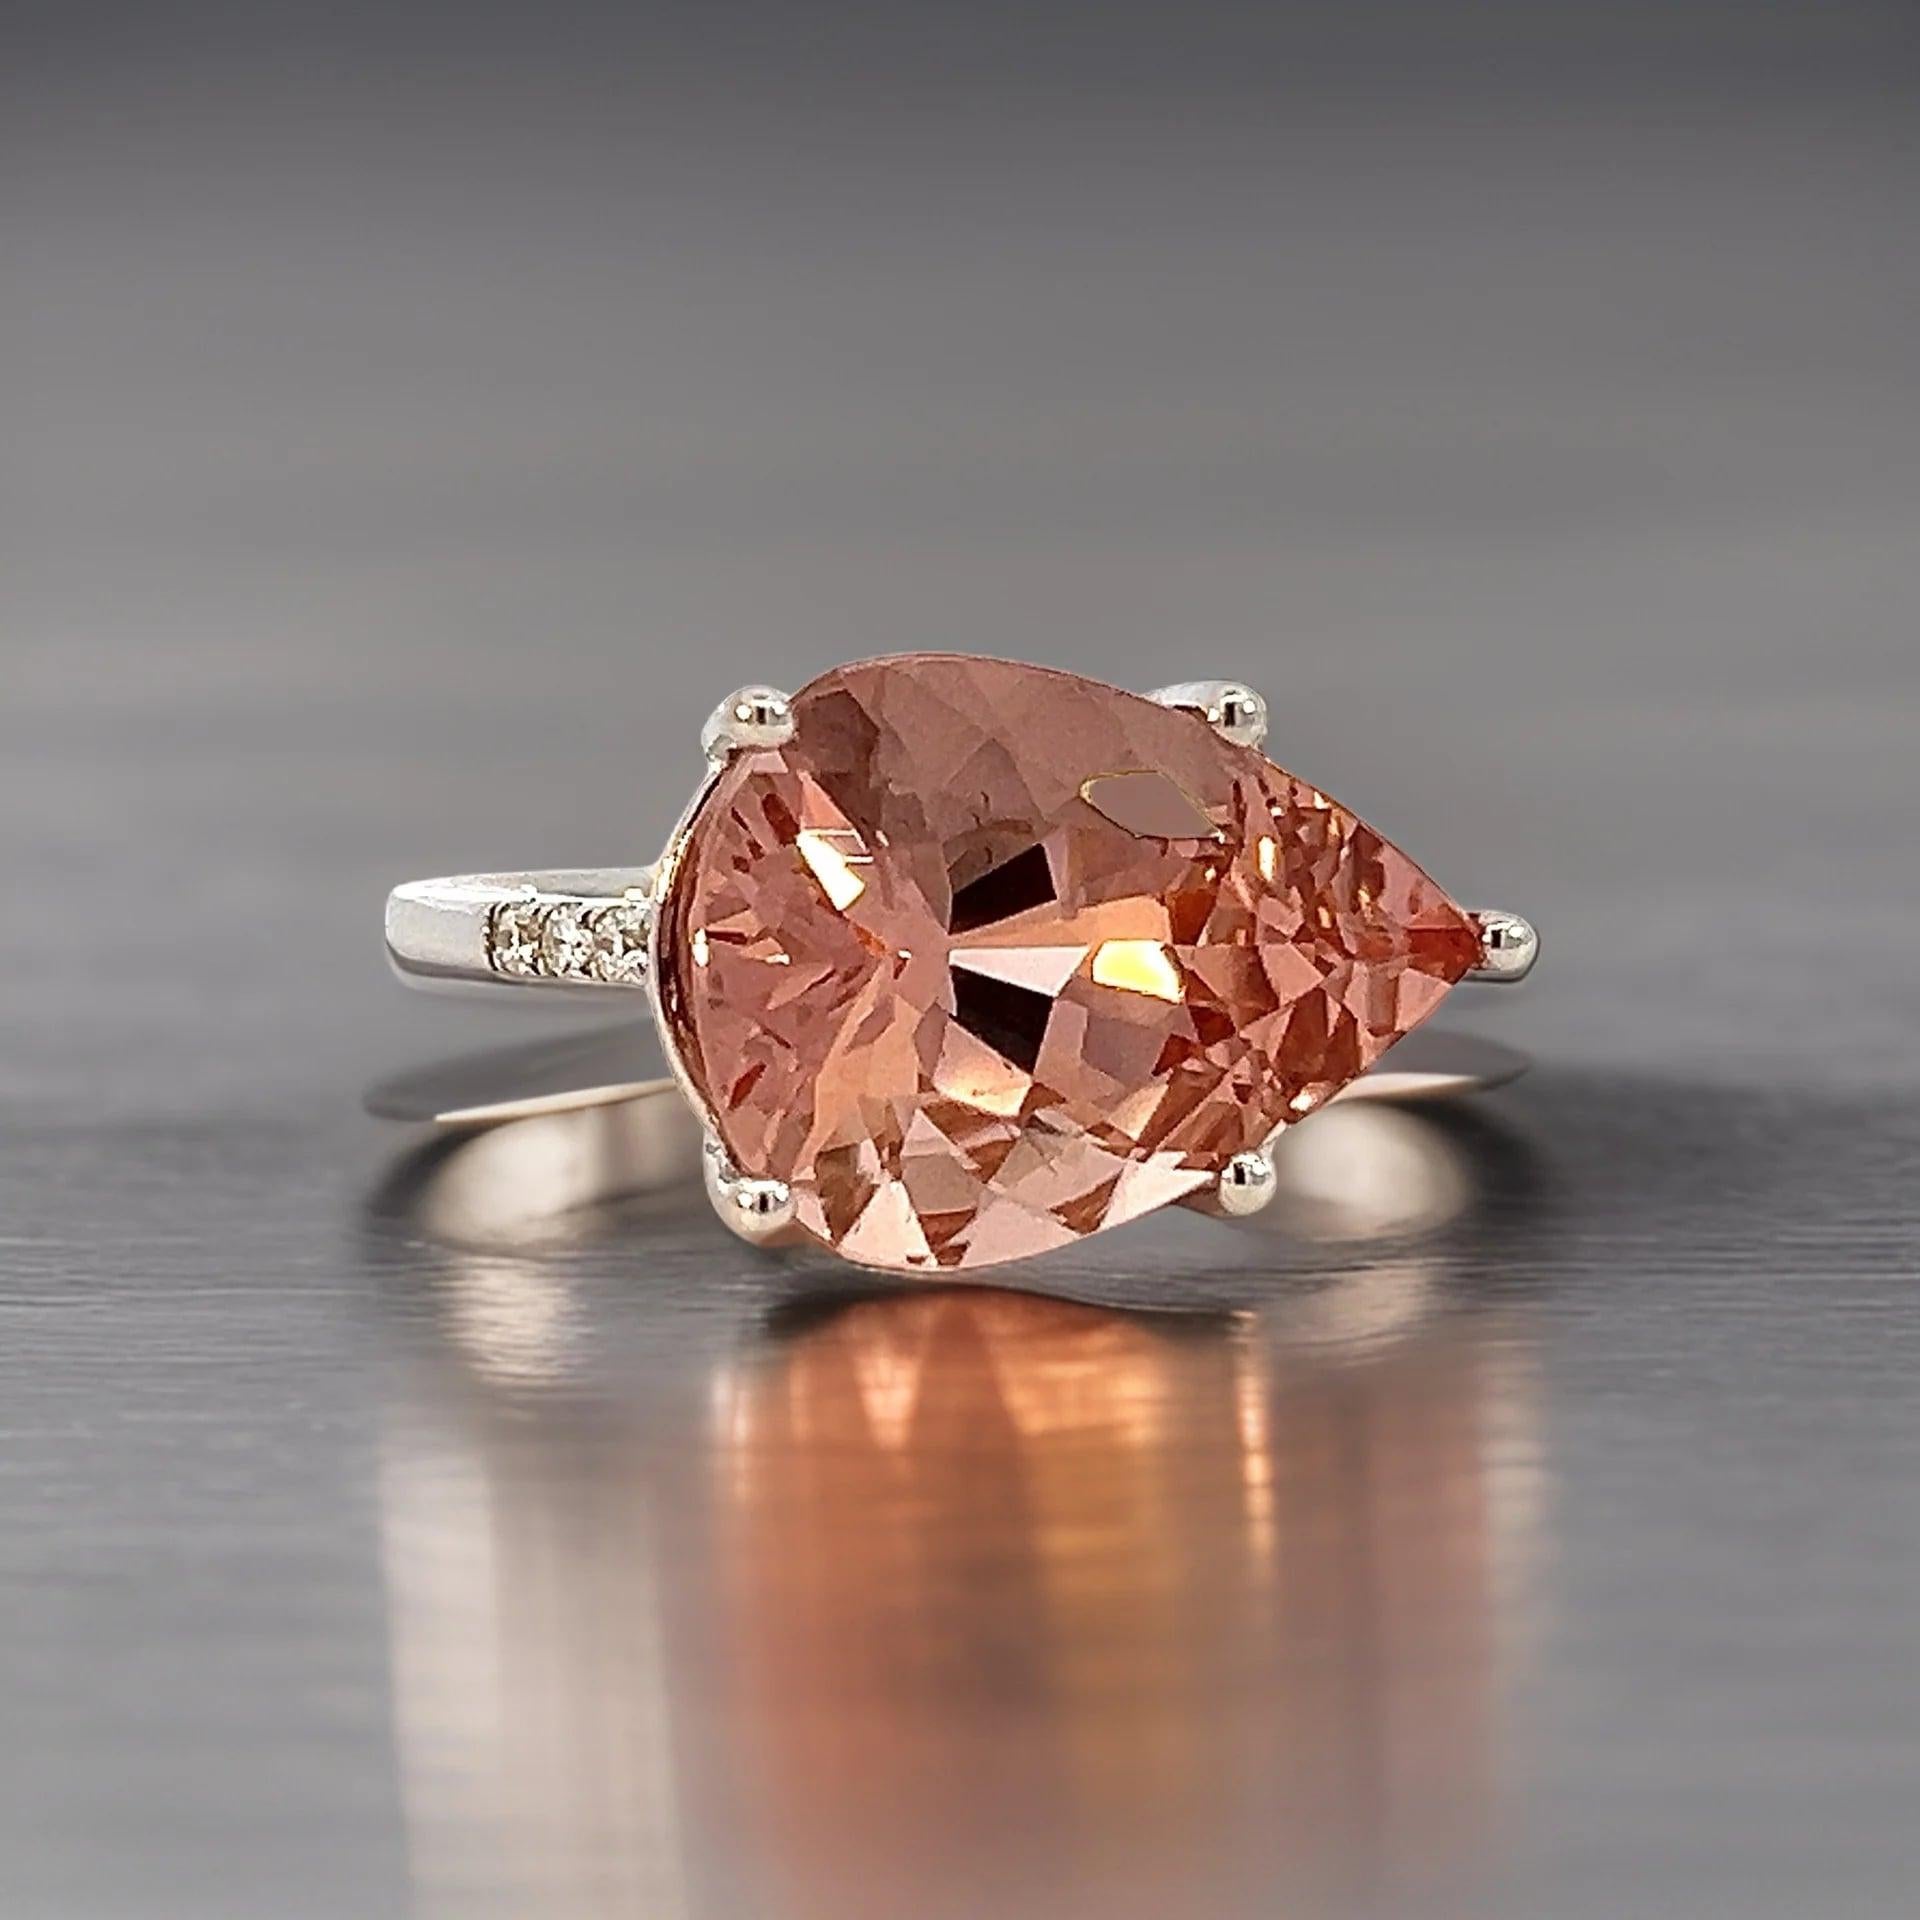 Natural Morganite Diamond Ring 6.5 14k White Gold 8.99 TCW Certified  For Sale 4